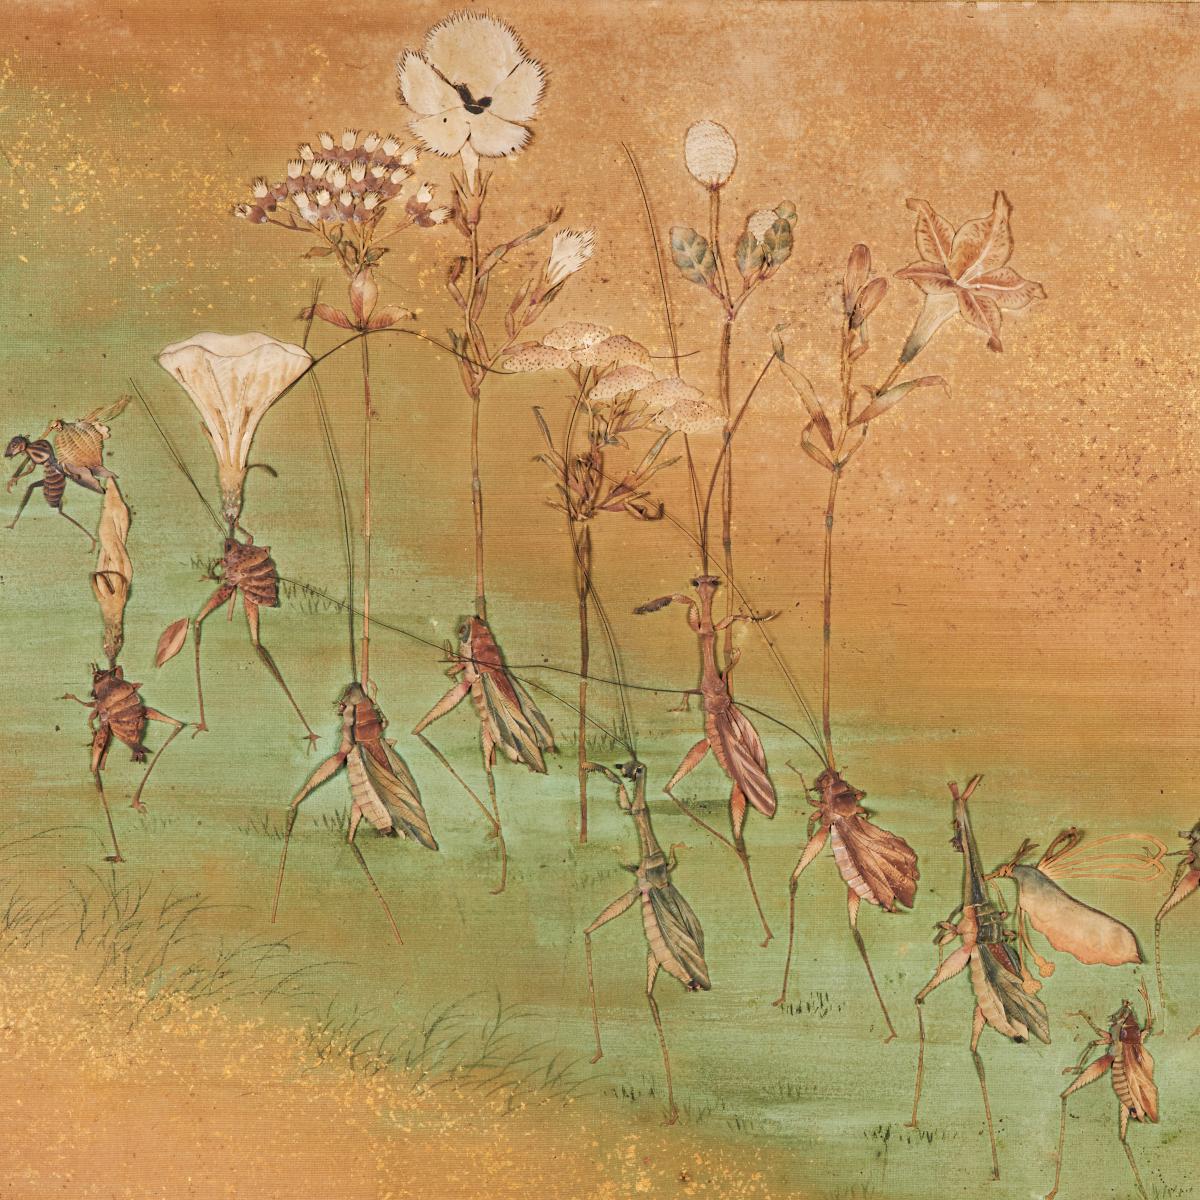 Japanese silk Oshi-e panel with a procession of insects signed Eigetsu, late Meiji Period